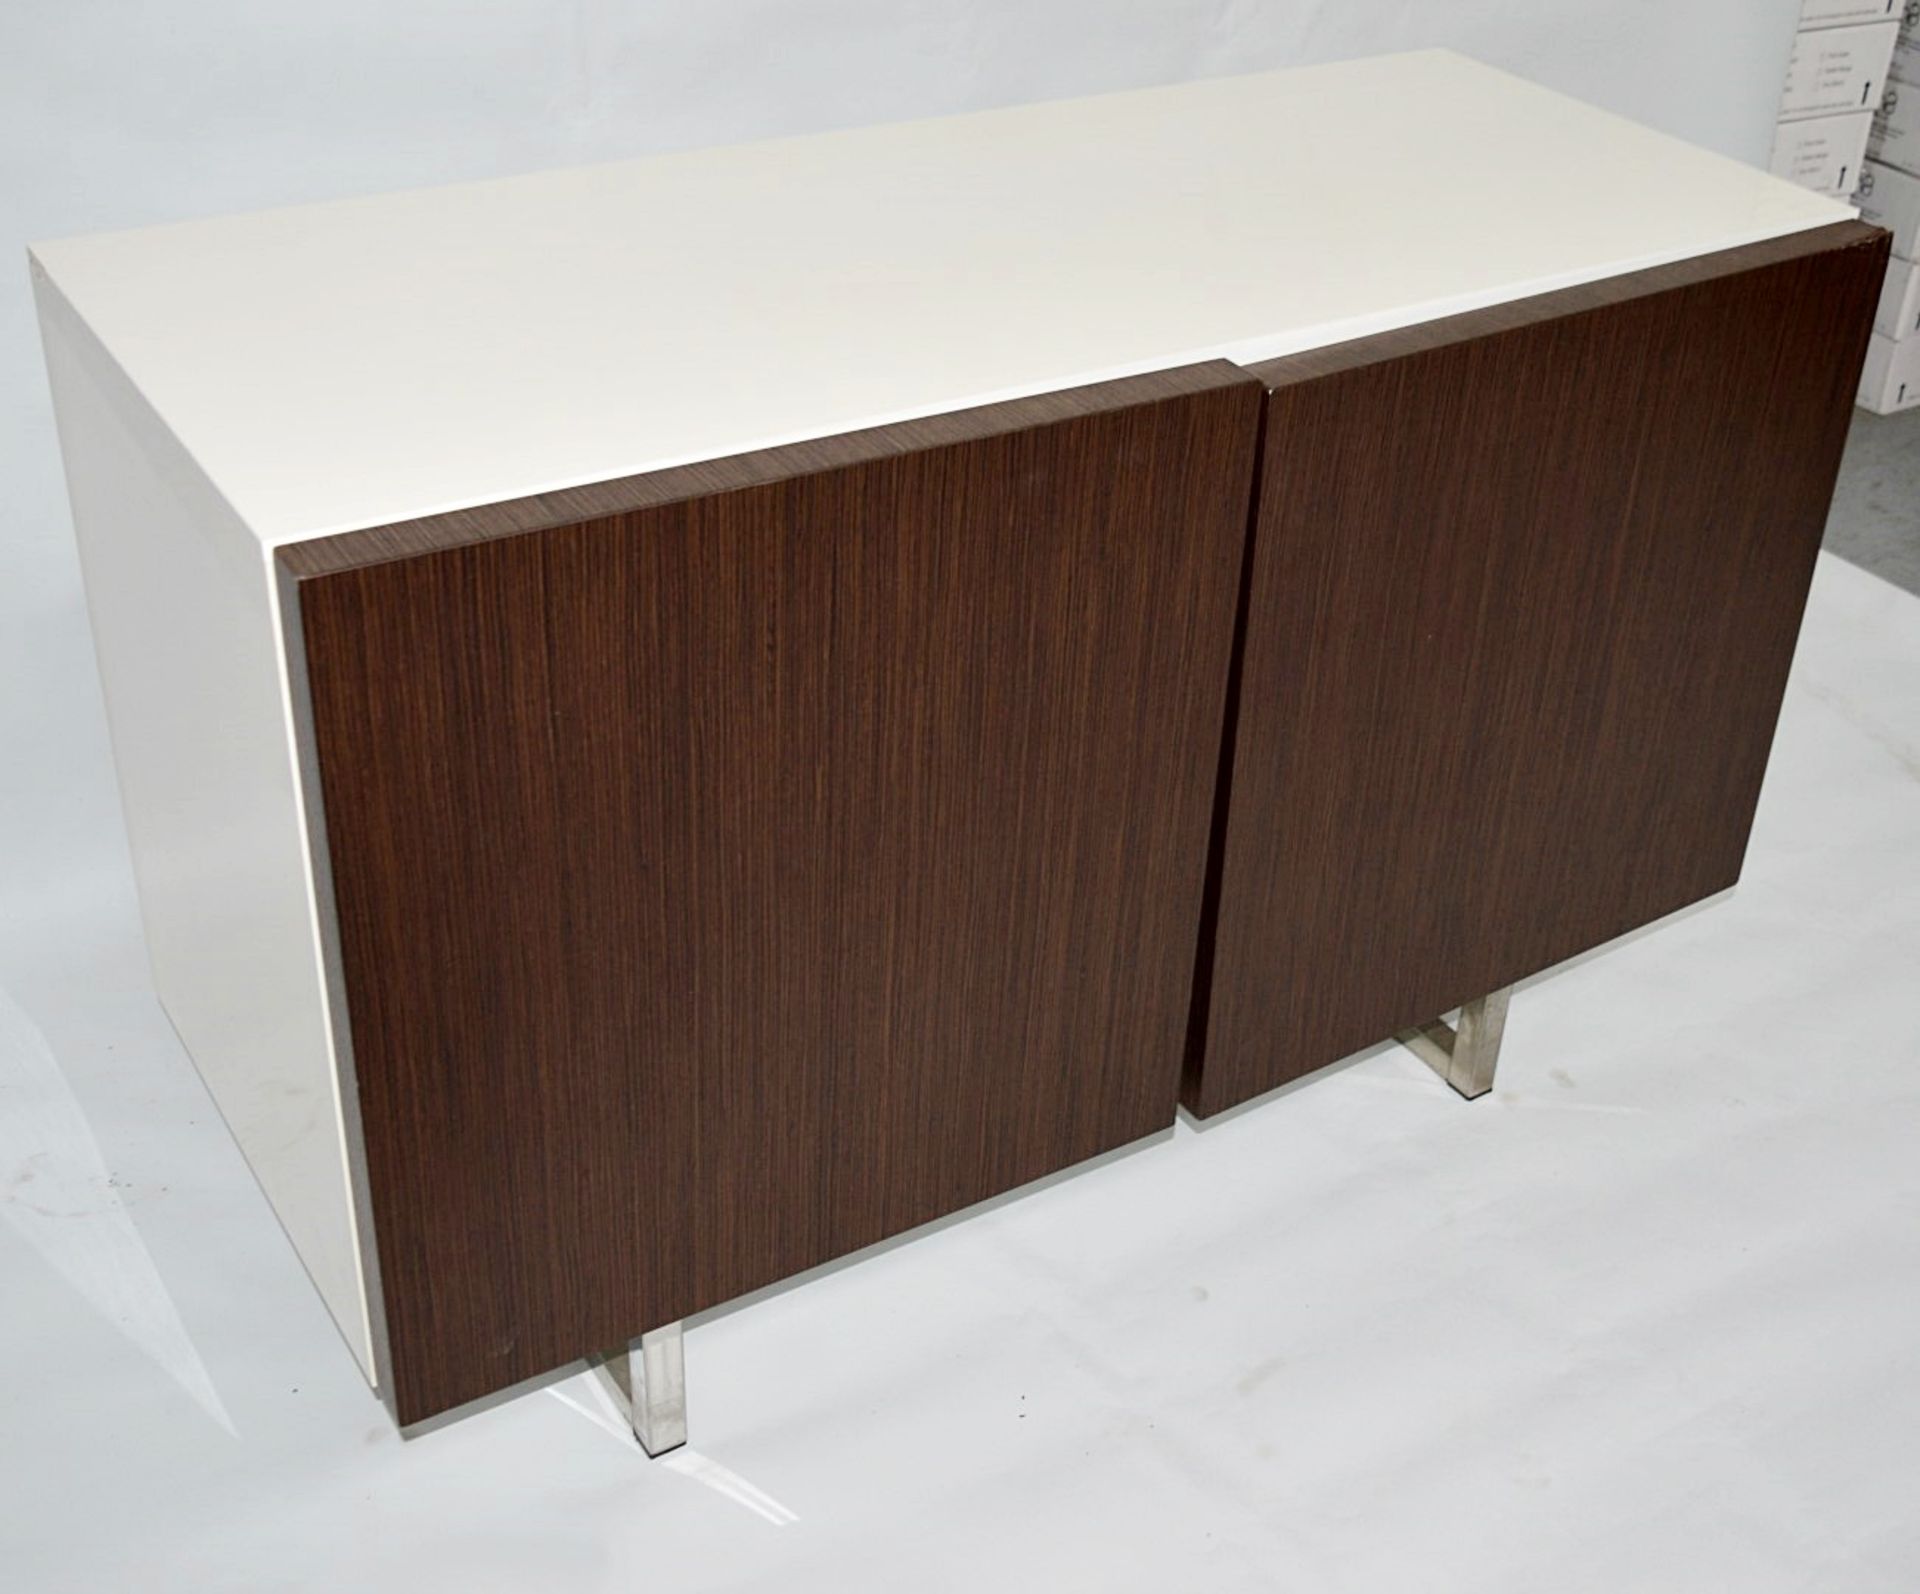 1 x Calligaris Seattle Glossy White 2 Door Sideboard - (cs6004-1) - Ref: 1670447 - CL087 - Location: